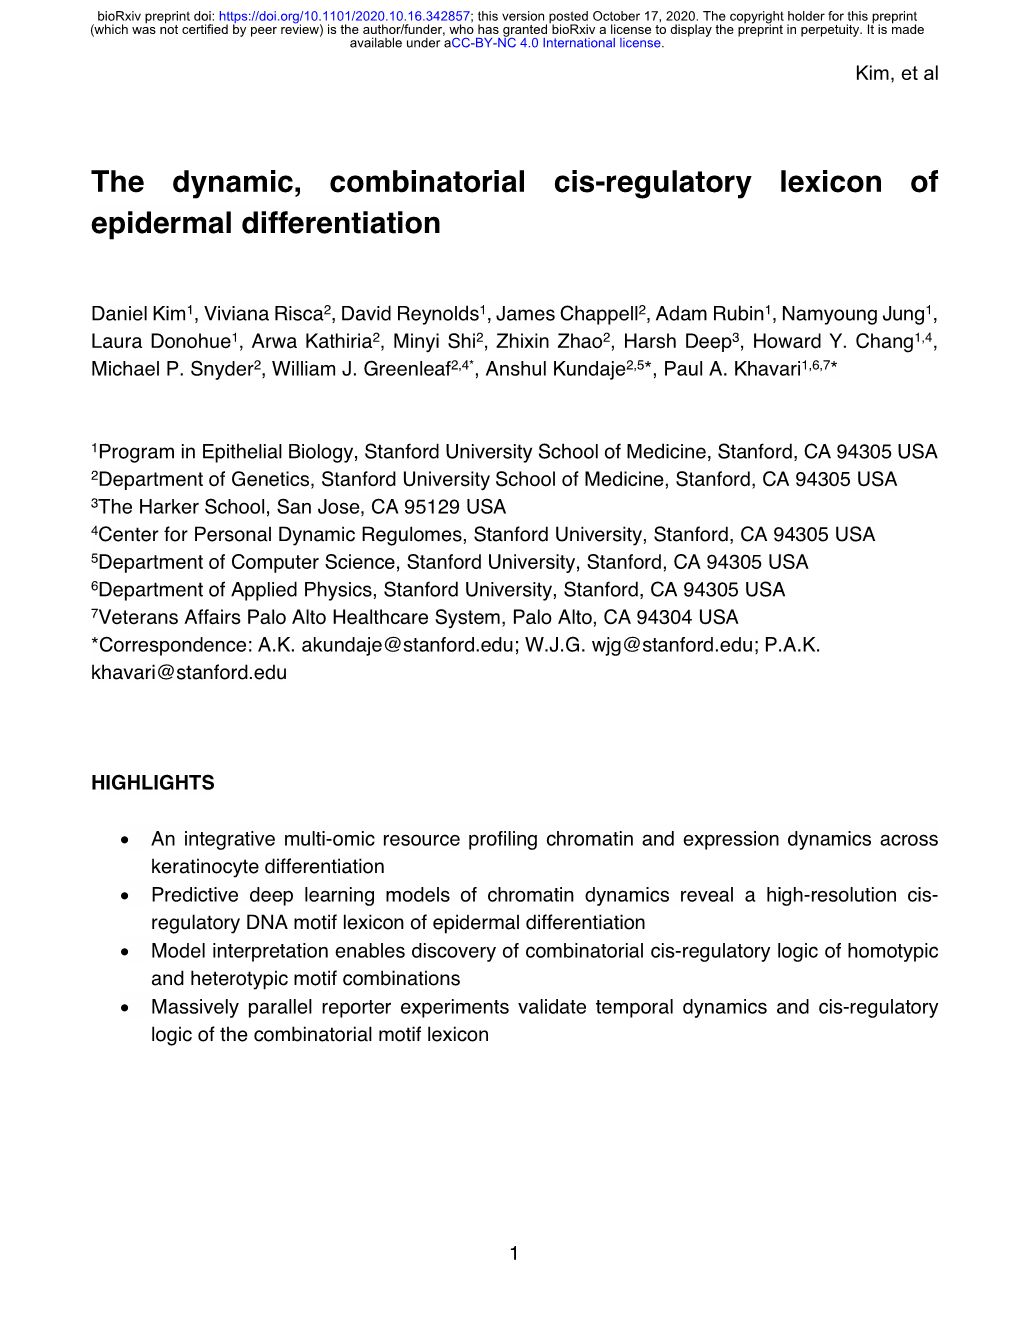 The Dynamic, Combinatorial Cis-Regulatory Lexicon of Epidermal Differentiation